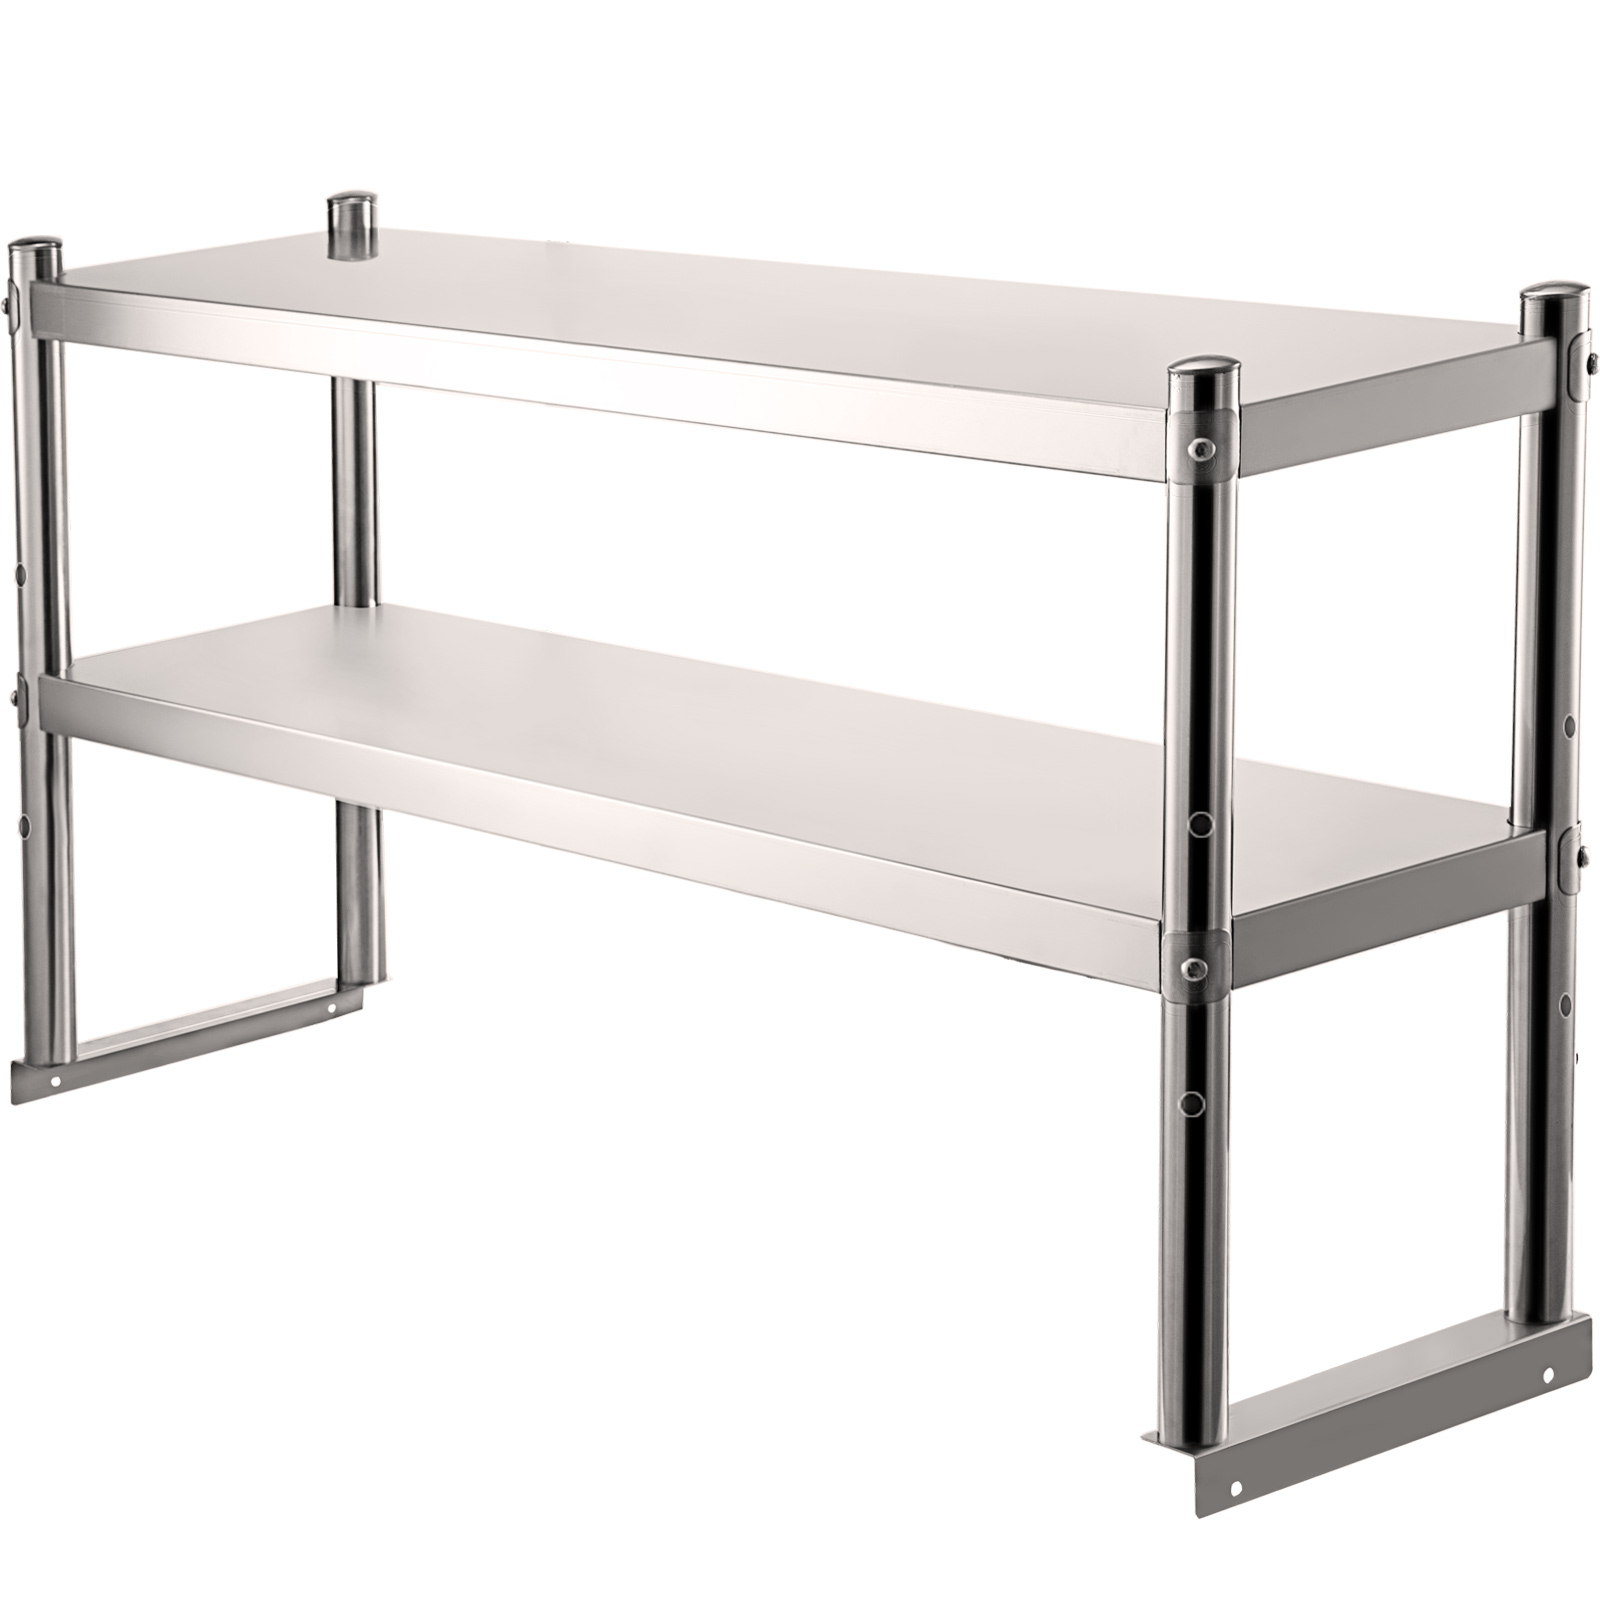 ANY SIZE Stainless Steel Work Prep Table Commercial Overshelf Double Stainless Steel Table With Overshelf